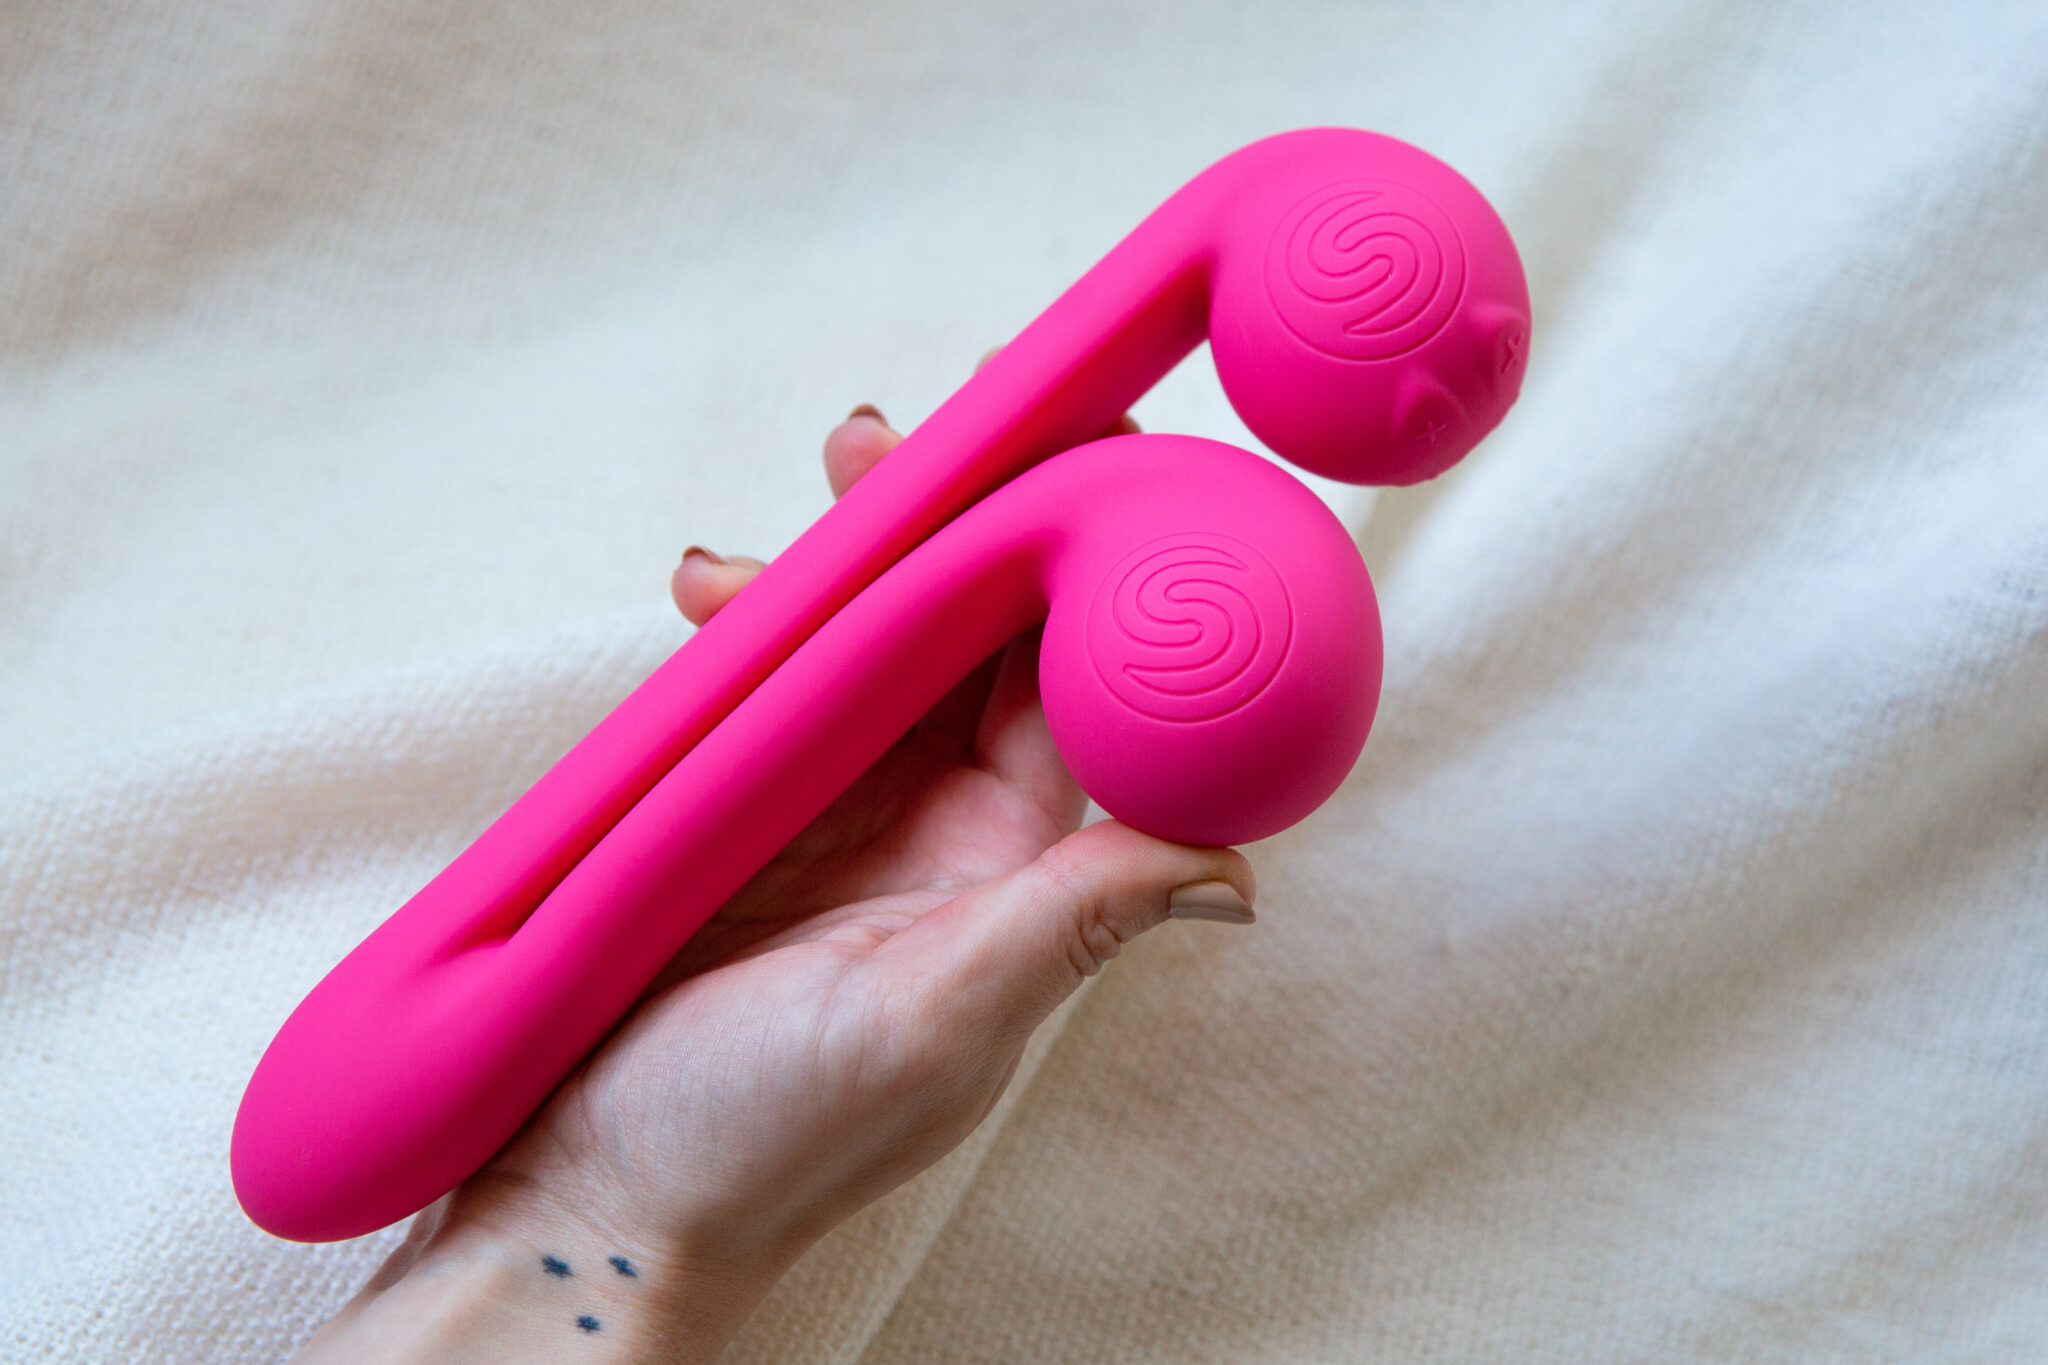 A woman's hand holding the pink and powerful rabbit vibrator.